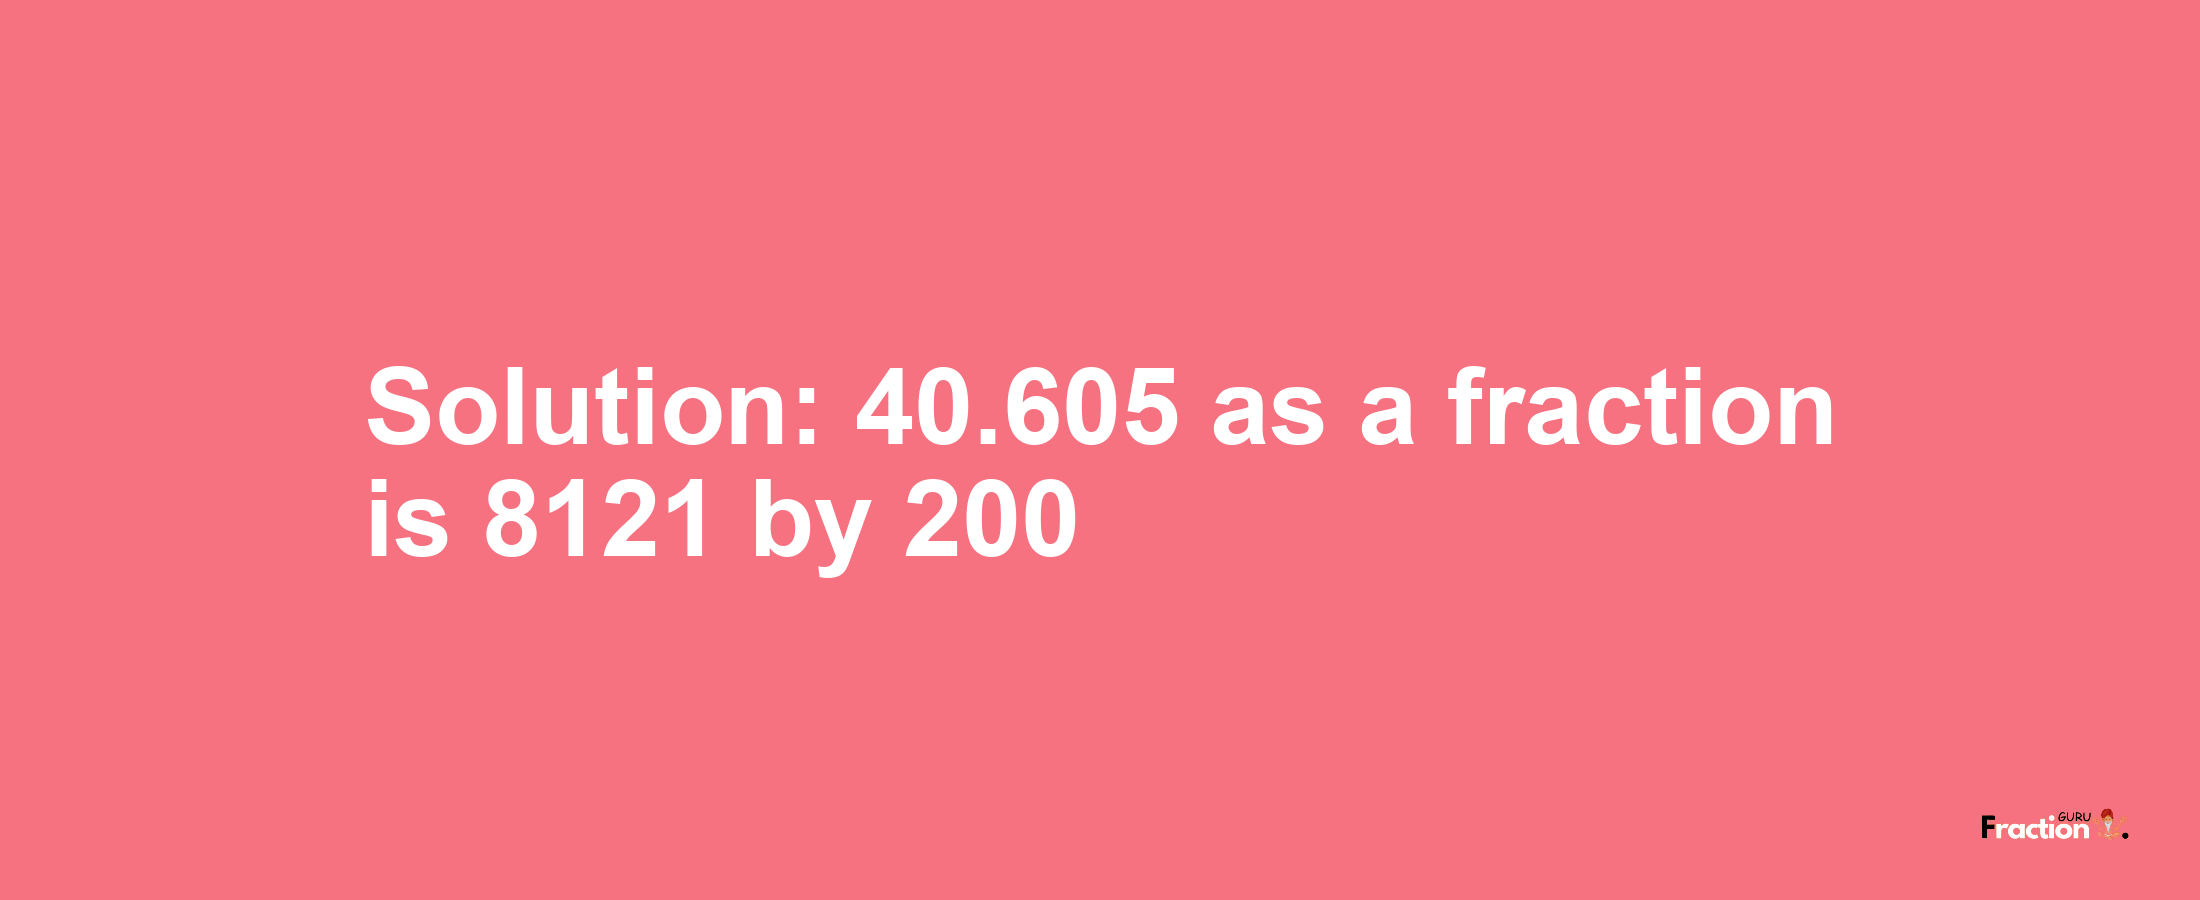 Solution:40.605 as a fraction is 8121/200